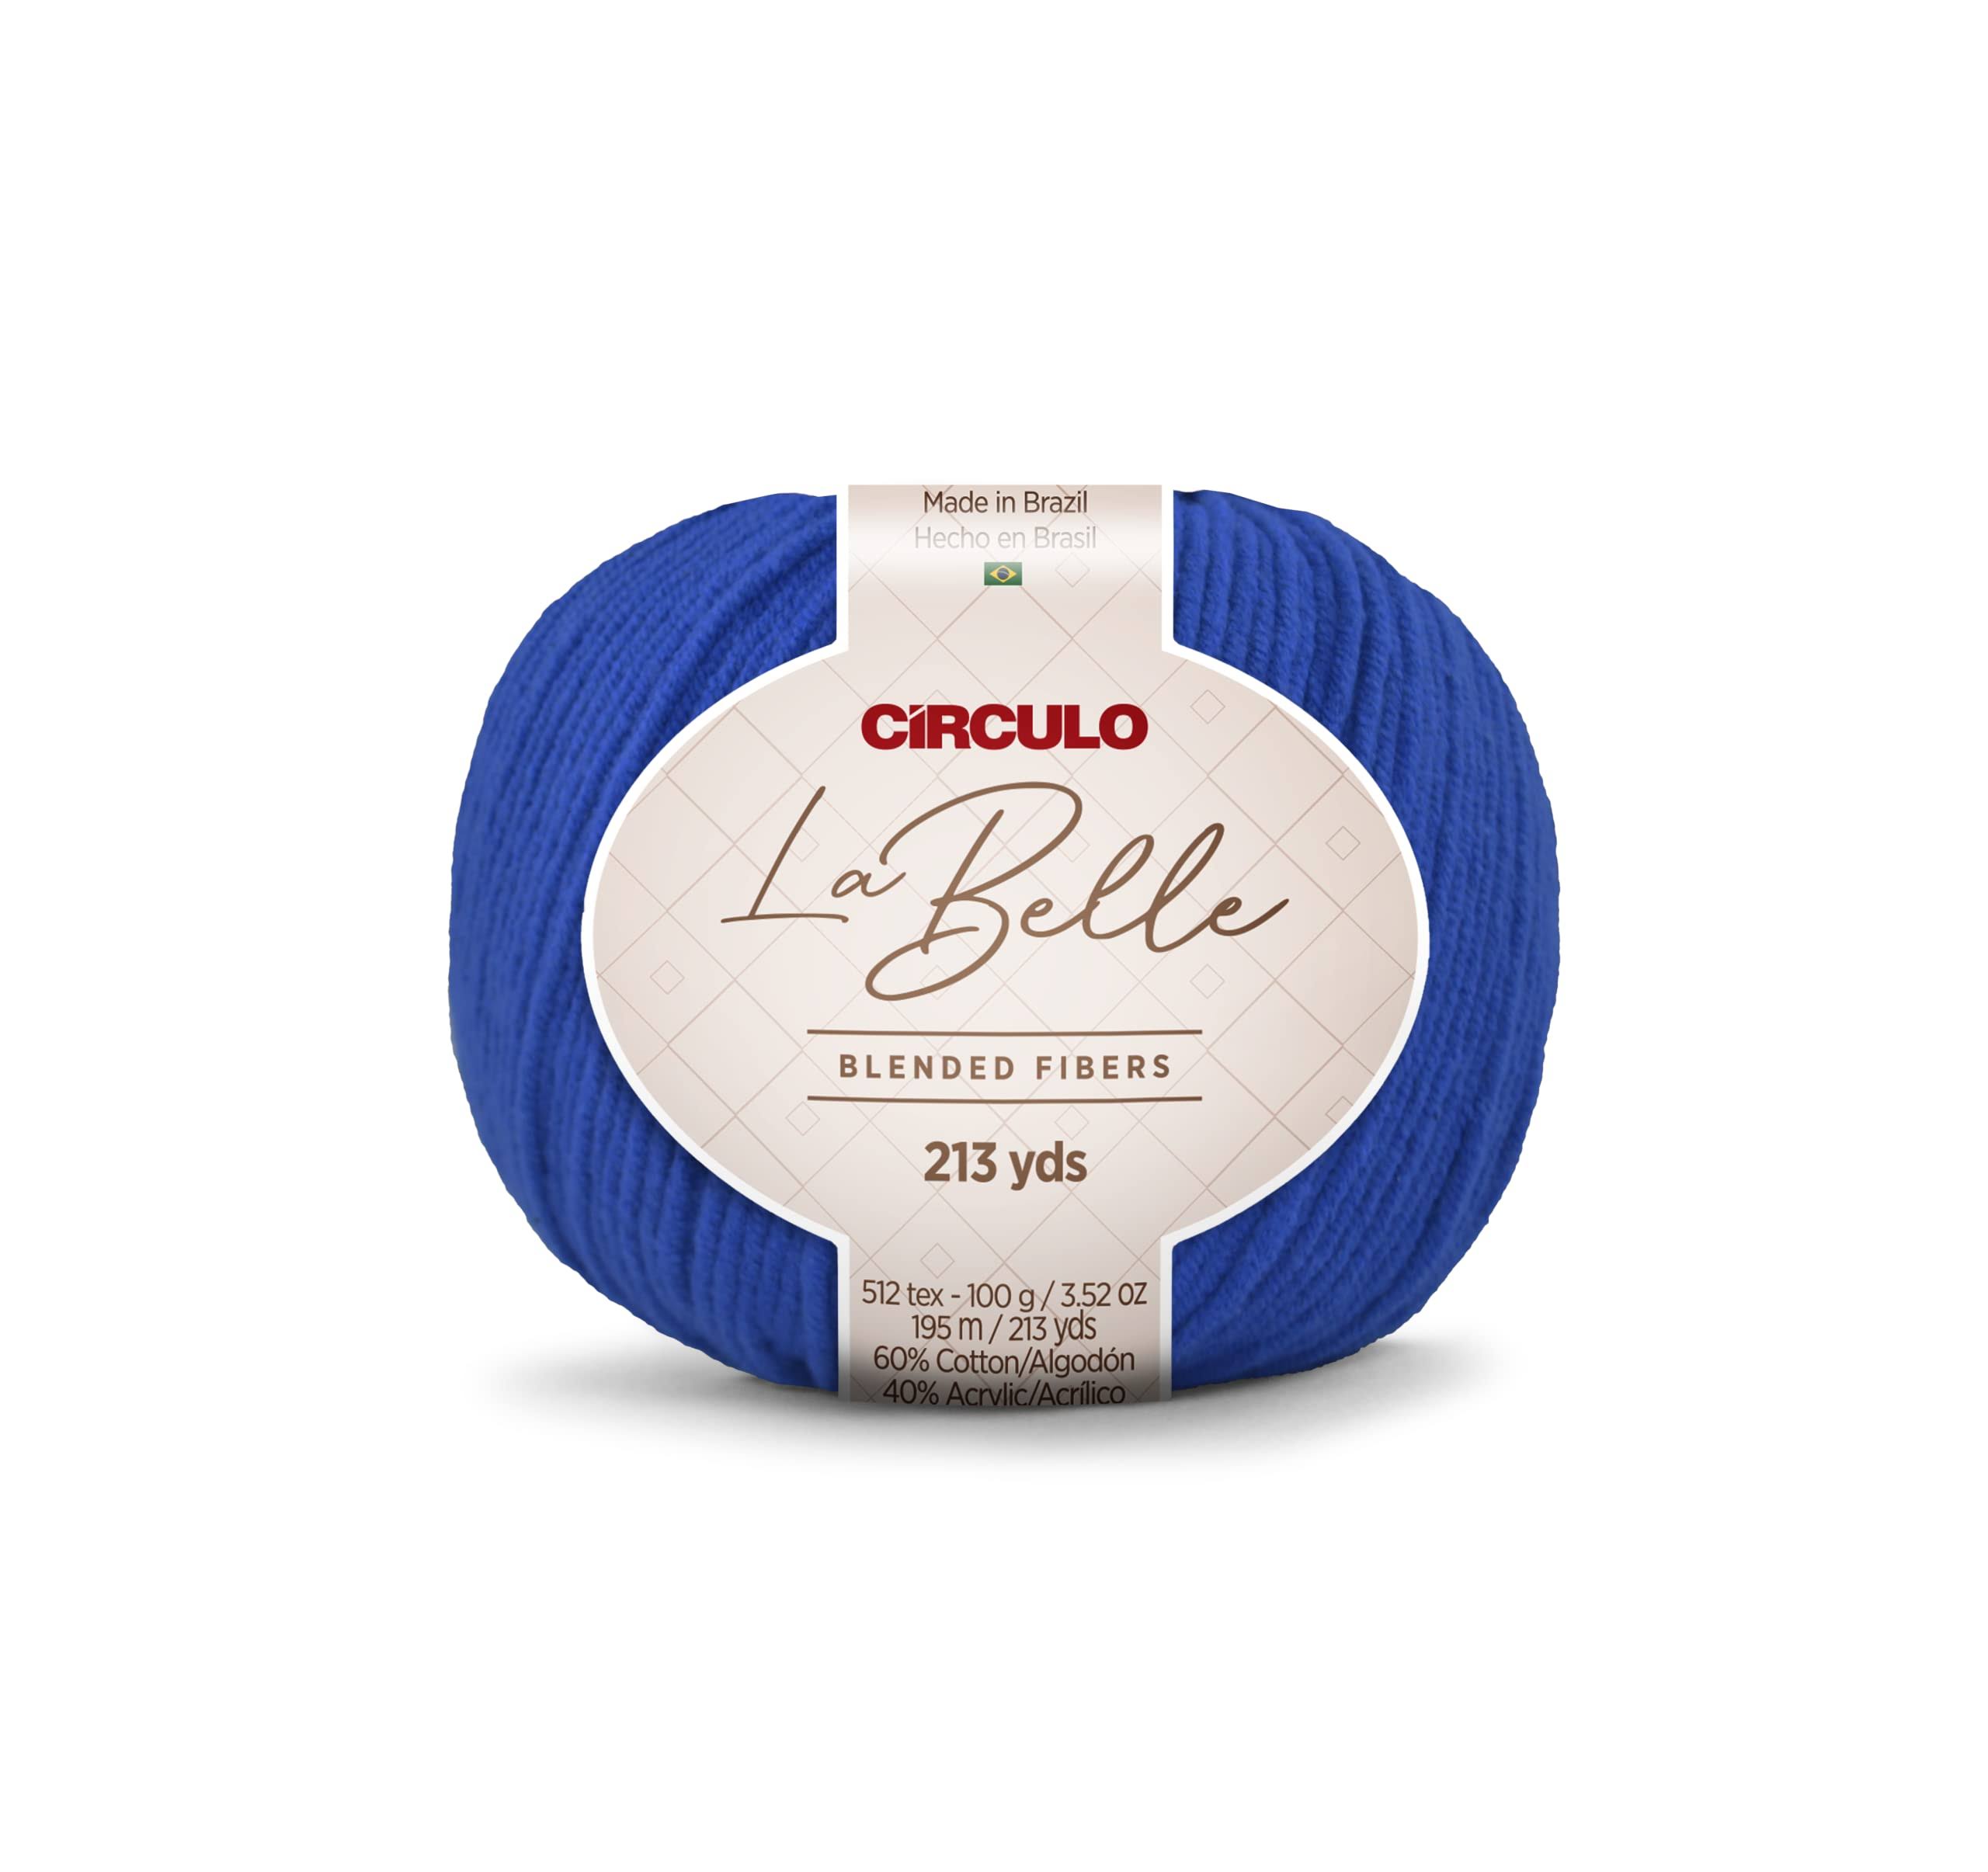 círculo La Belle Yarn - 60% Cotton 40% Acrylic Blended Yarn - Worsted - 213 yds, 3.5 oz (Pack of 1 BALL) - Color 2829